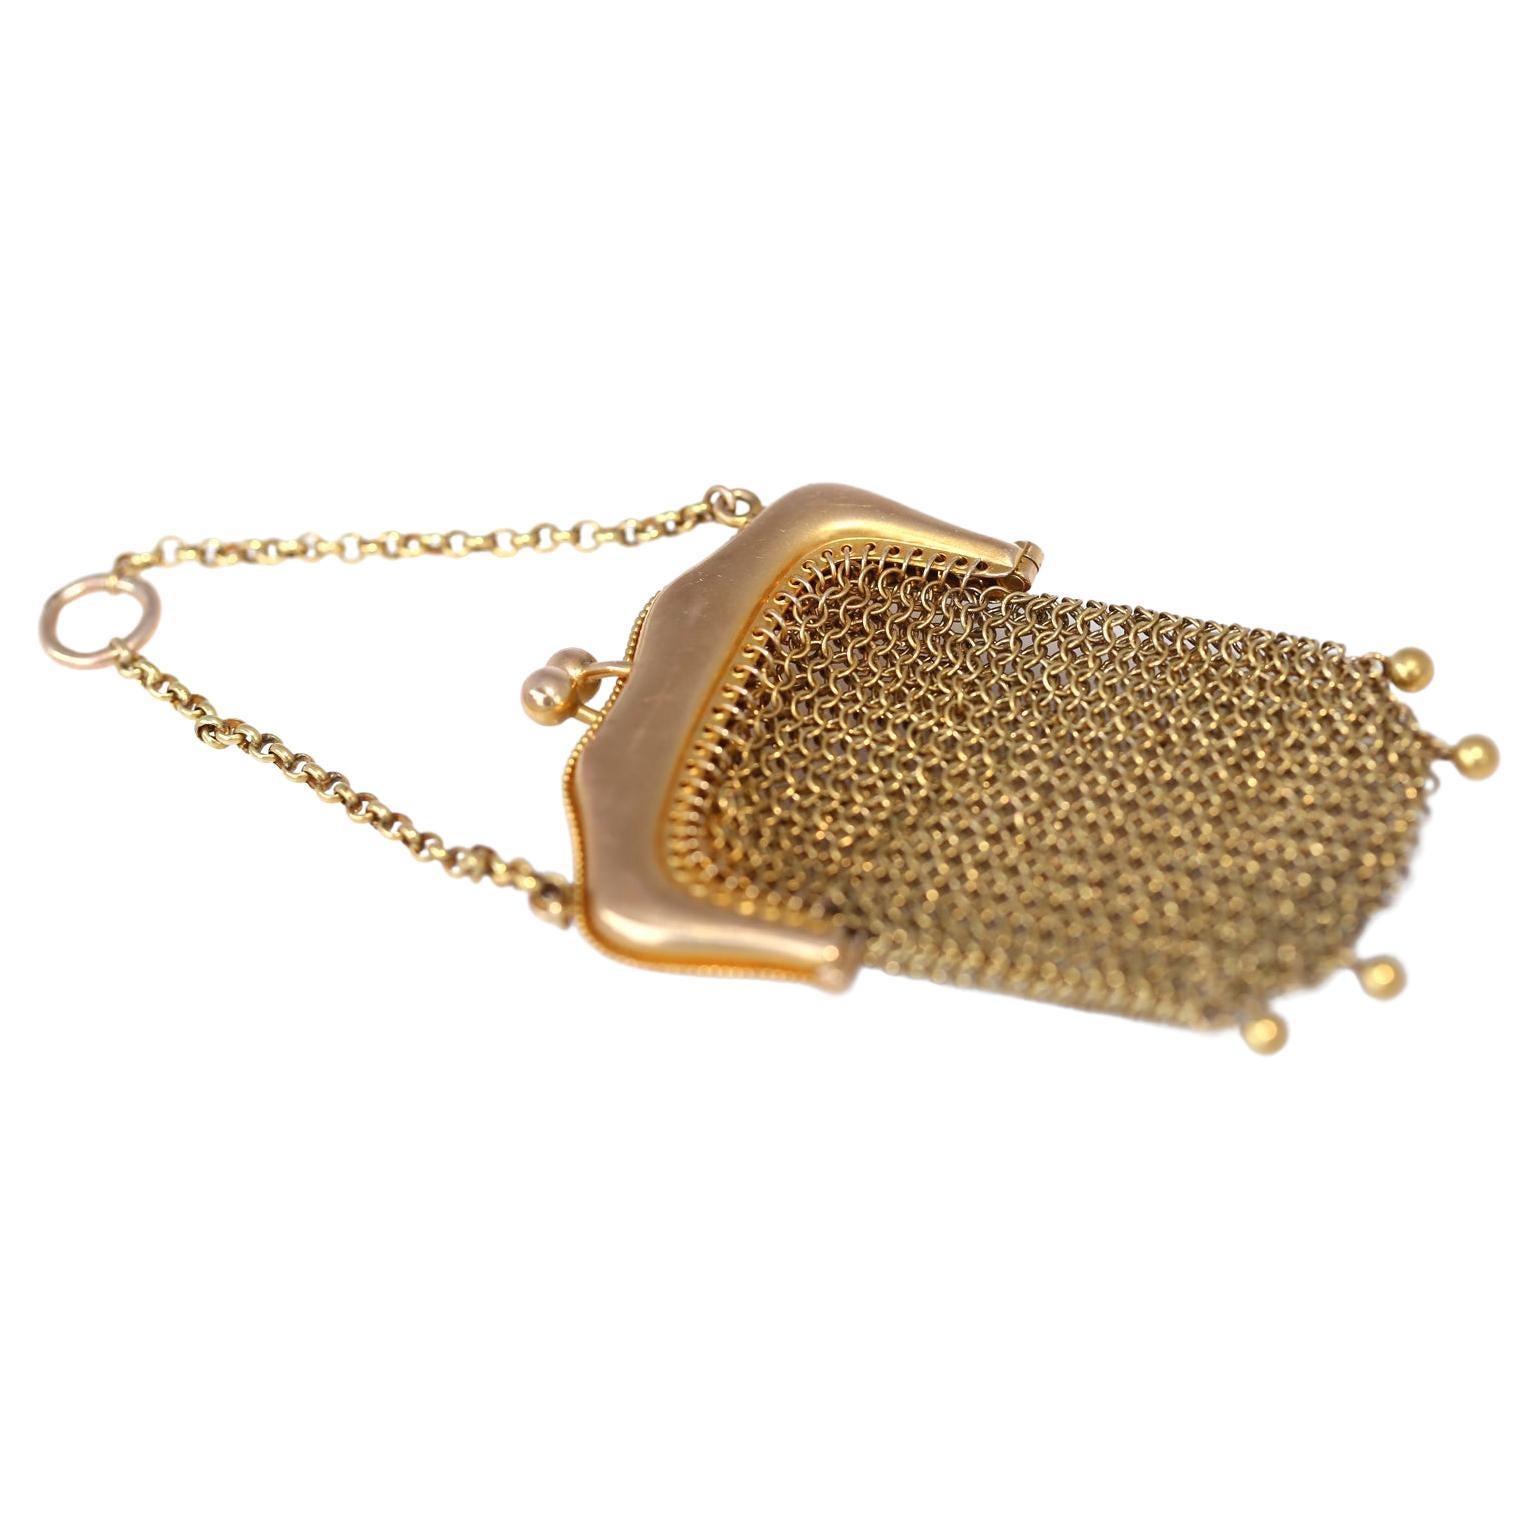 Antique Chain Mesh Purse - 19 For Sale on 1stDibs